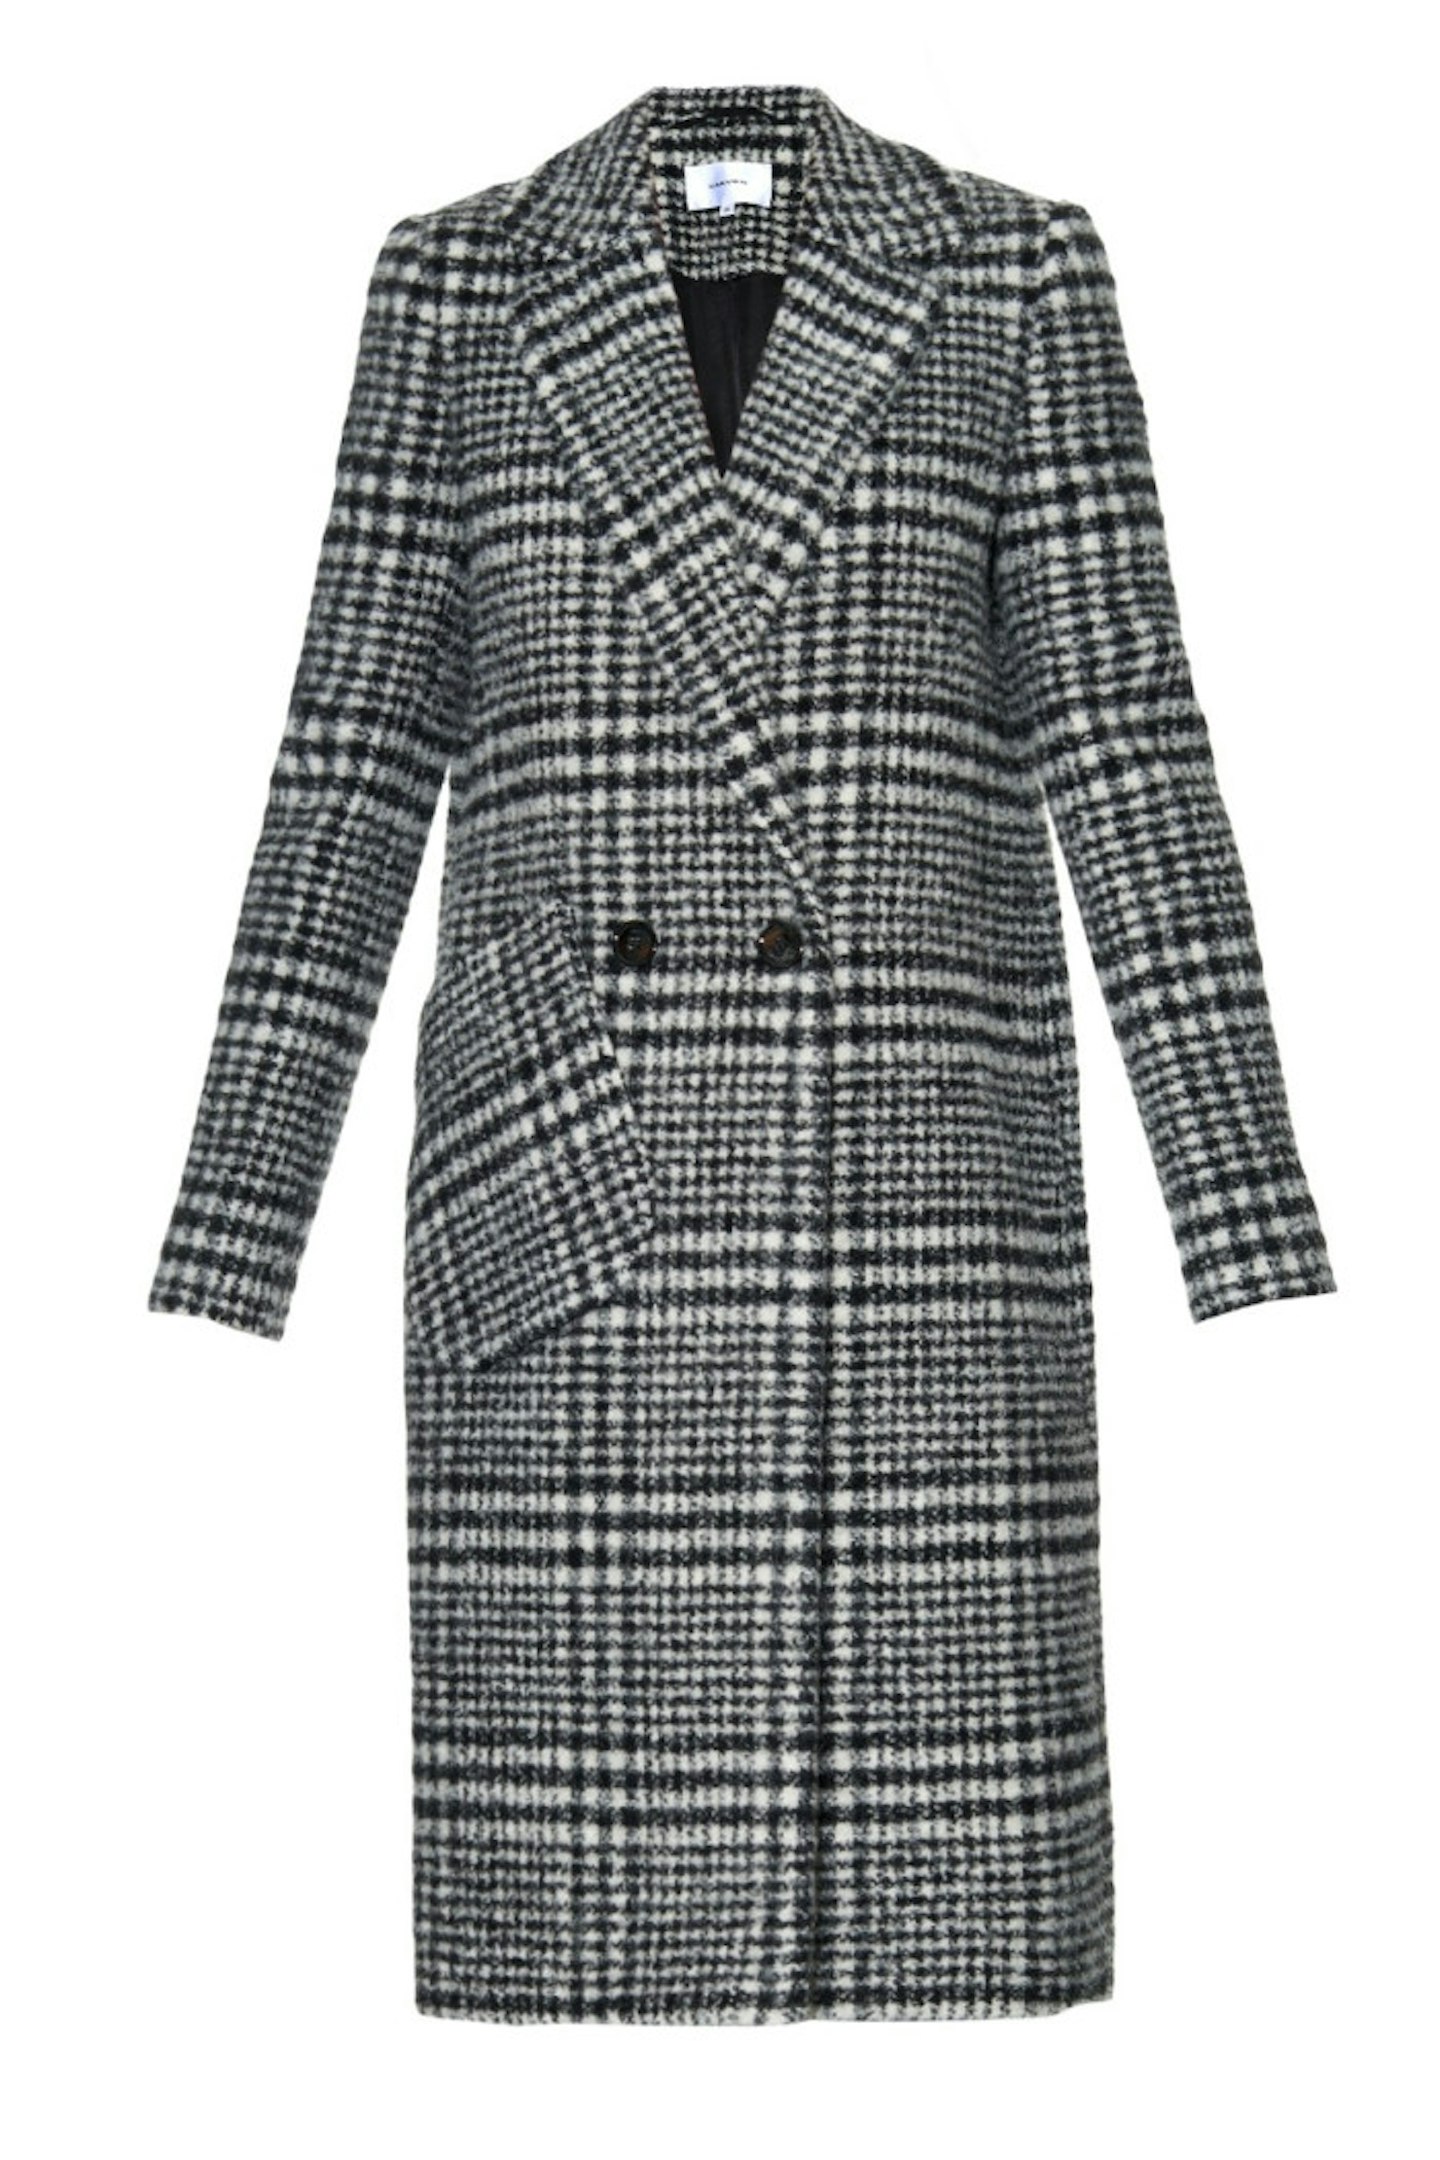 Perfect length. Perfect colour. An all round perfect coat for this season.